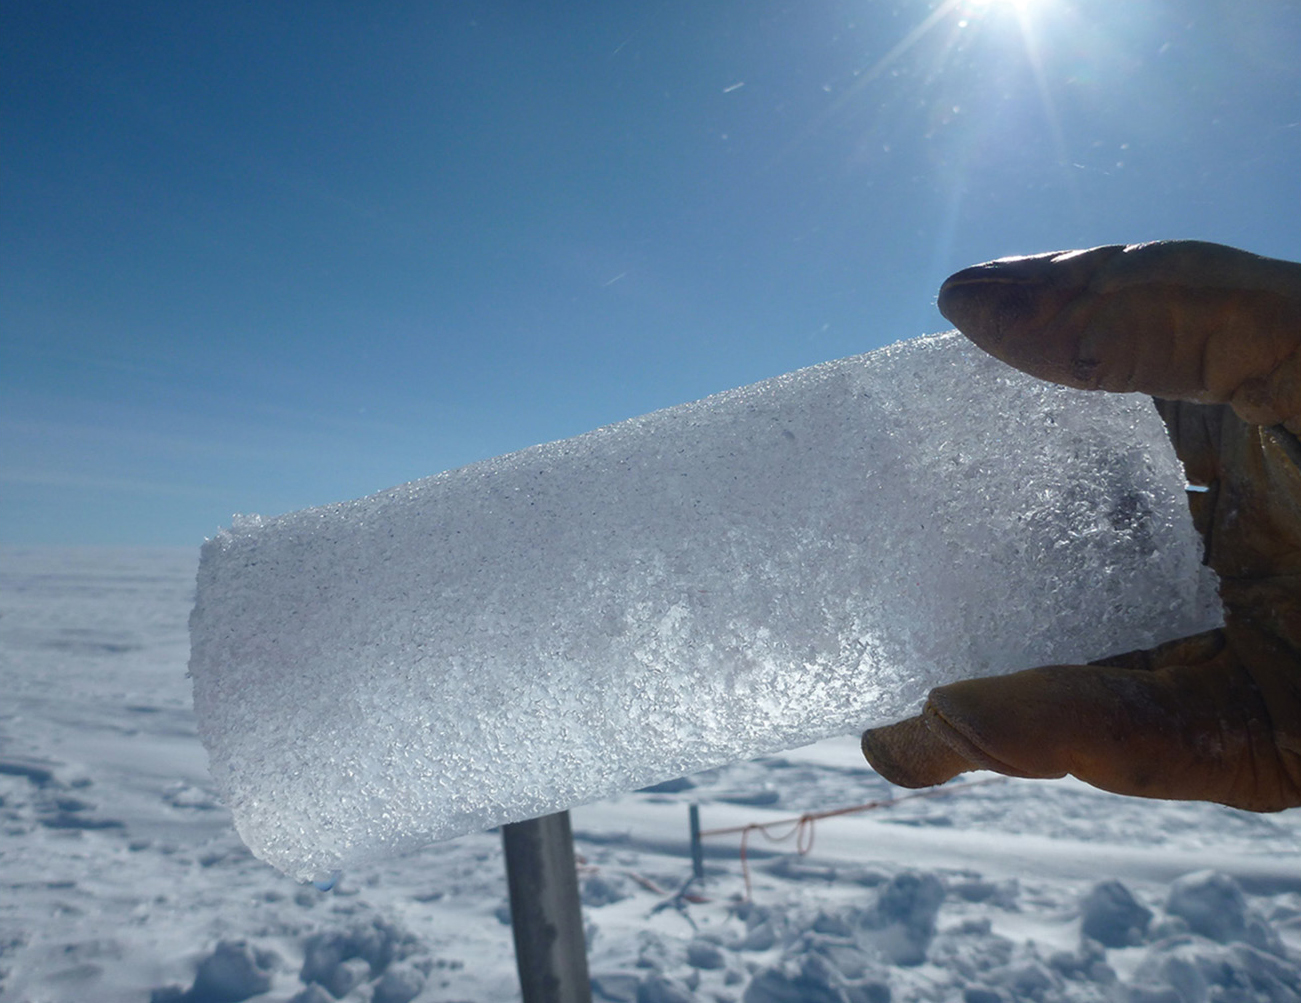 |	Figure 1: Ice core sample.  (Source: climate.nasa.gov/system/news_items/main_images/2616_p1000526-1280px-90.jpg)